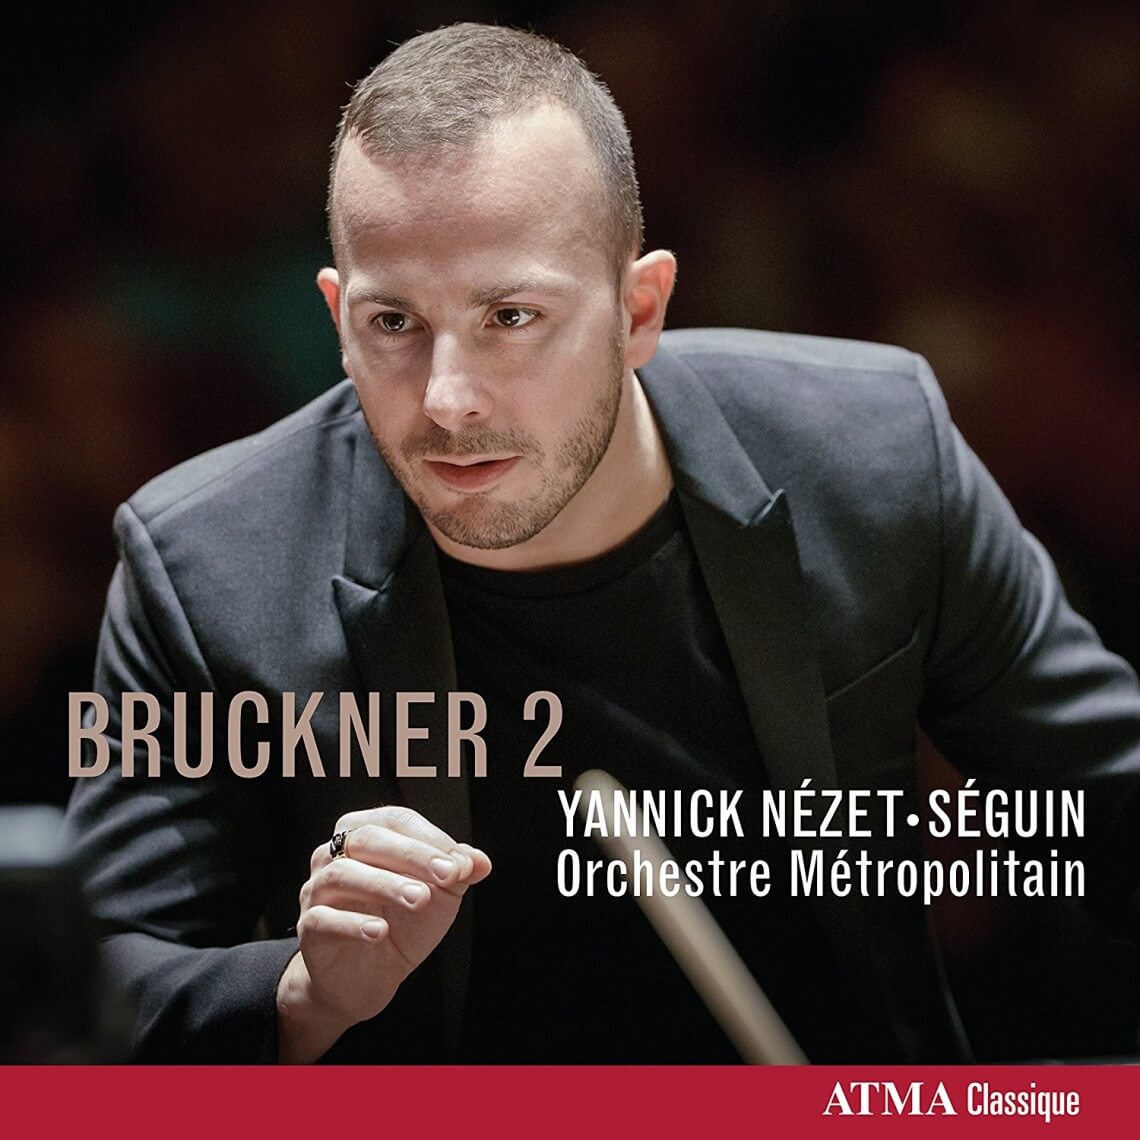 ATMA Classique continues its cycle of the complete symphonies of Anton Bruckner with the release of Symphony No. 2 performed by the Orchestre Métropolitain conducted by Yannick Nézet-Séguin.